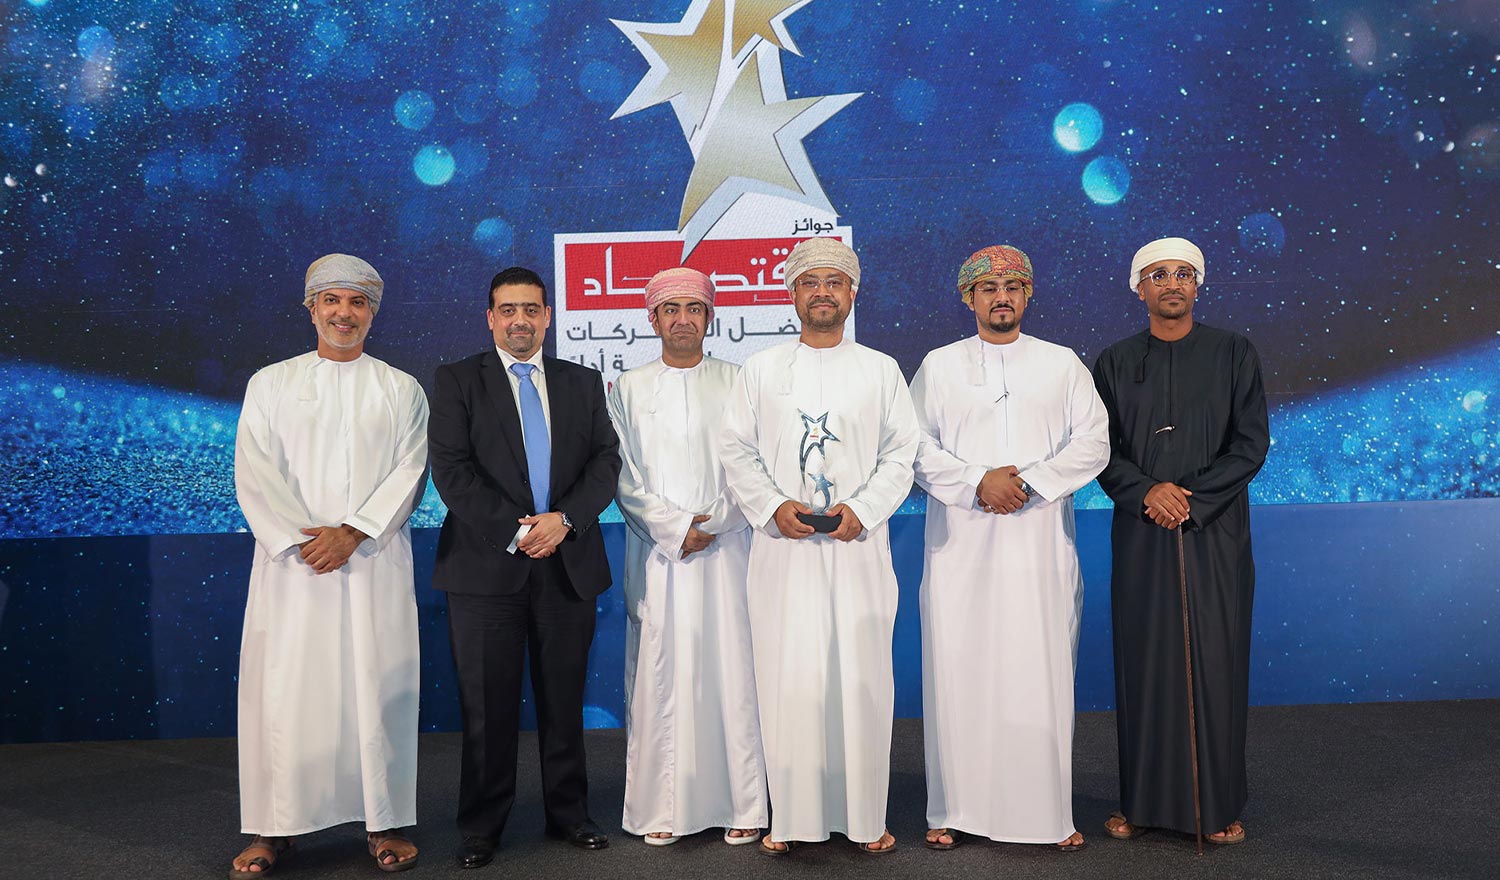 United Finance wins Best Performing Company award at Alam Al-Iktisaad Awards 2022 event